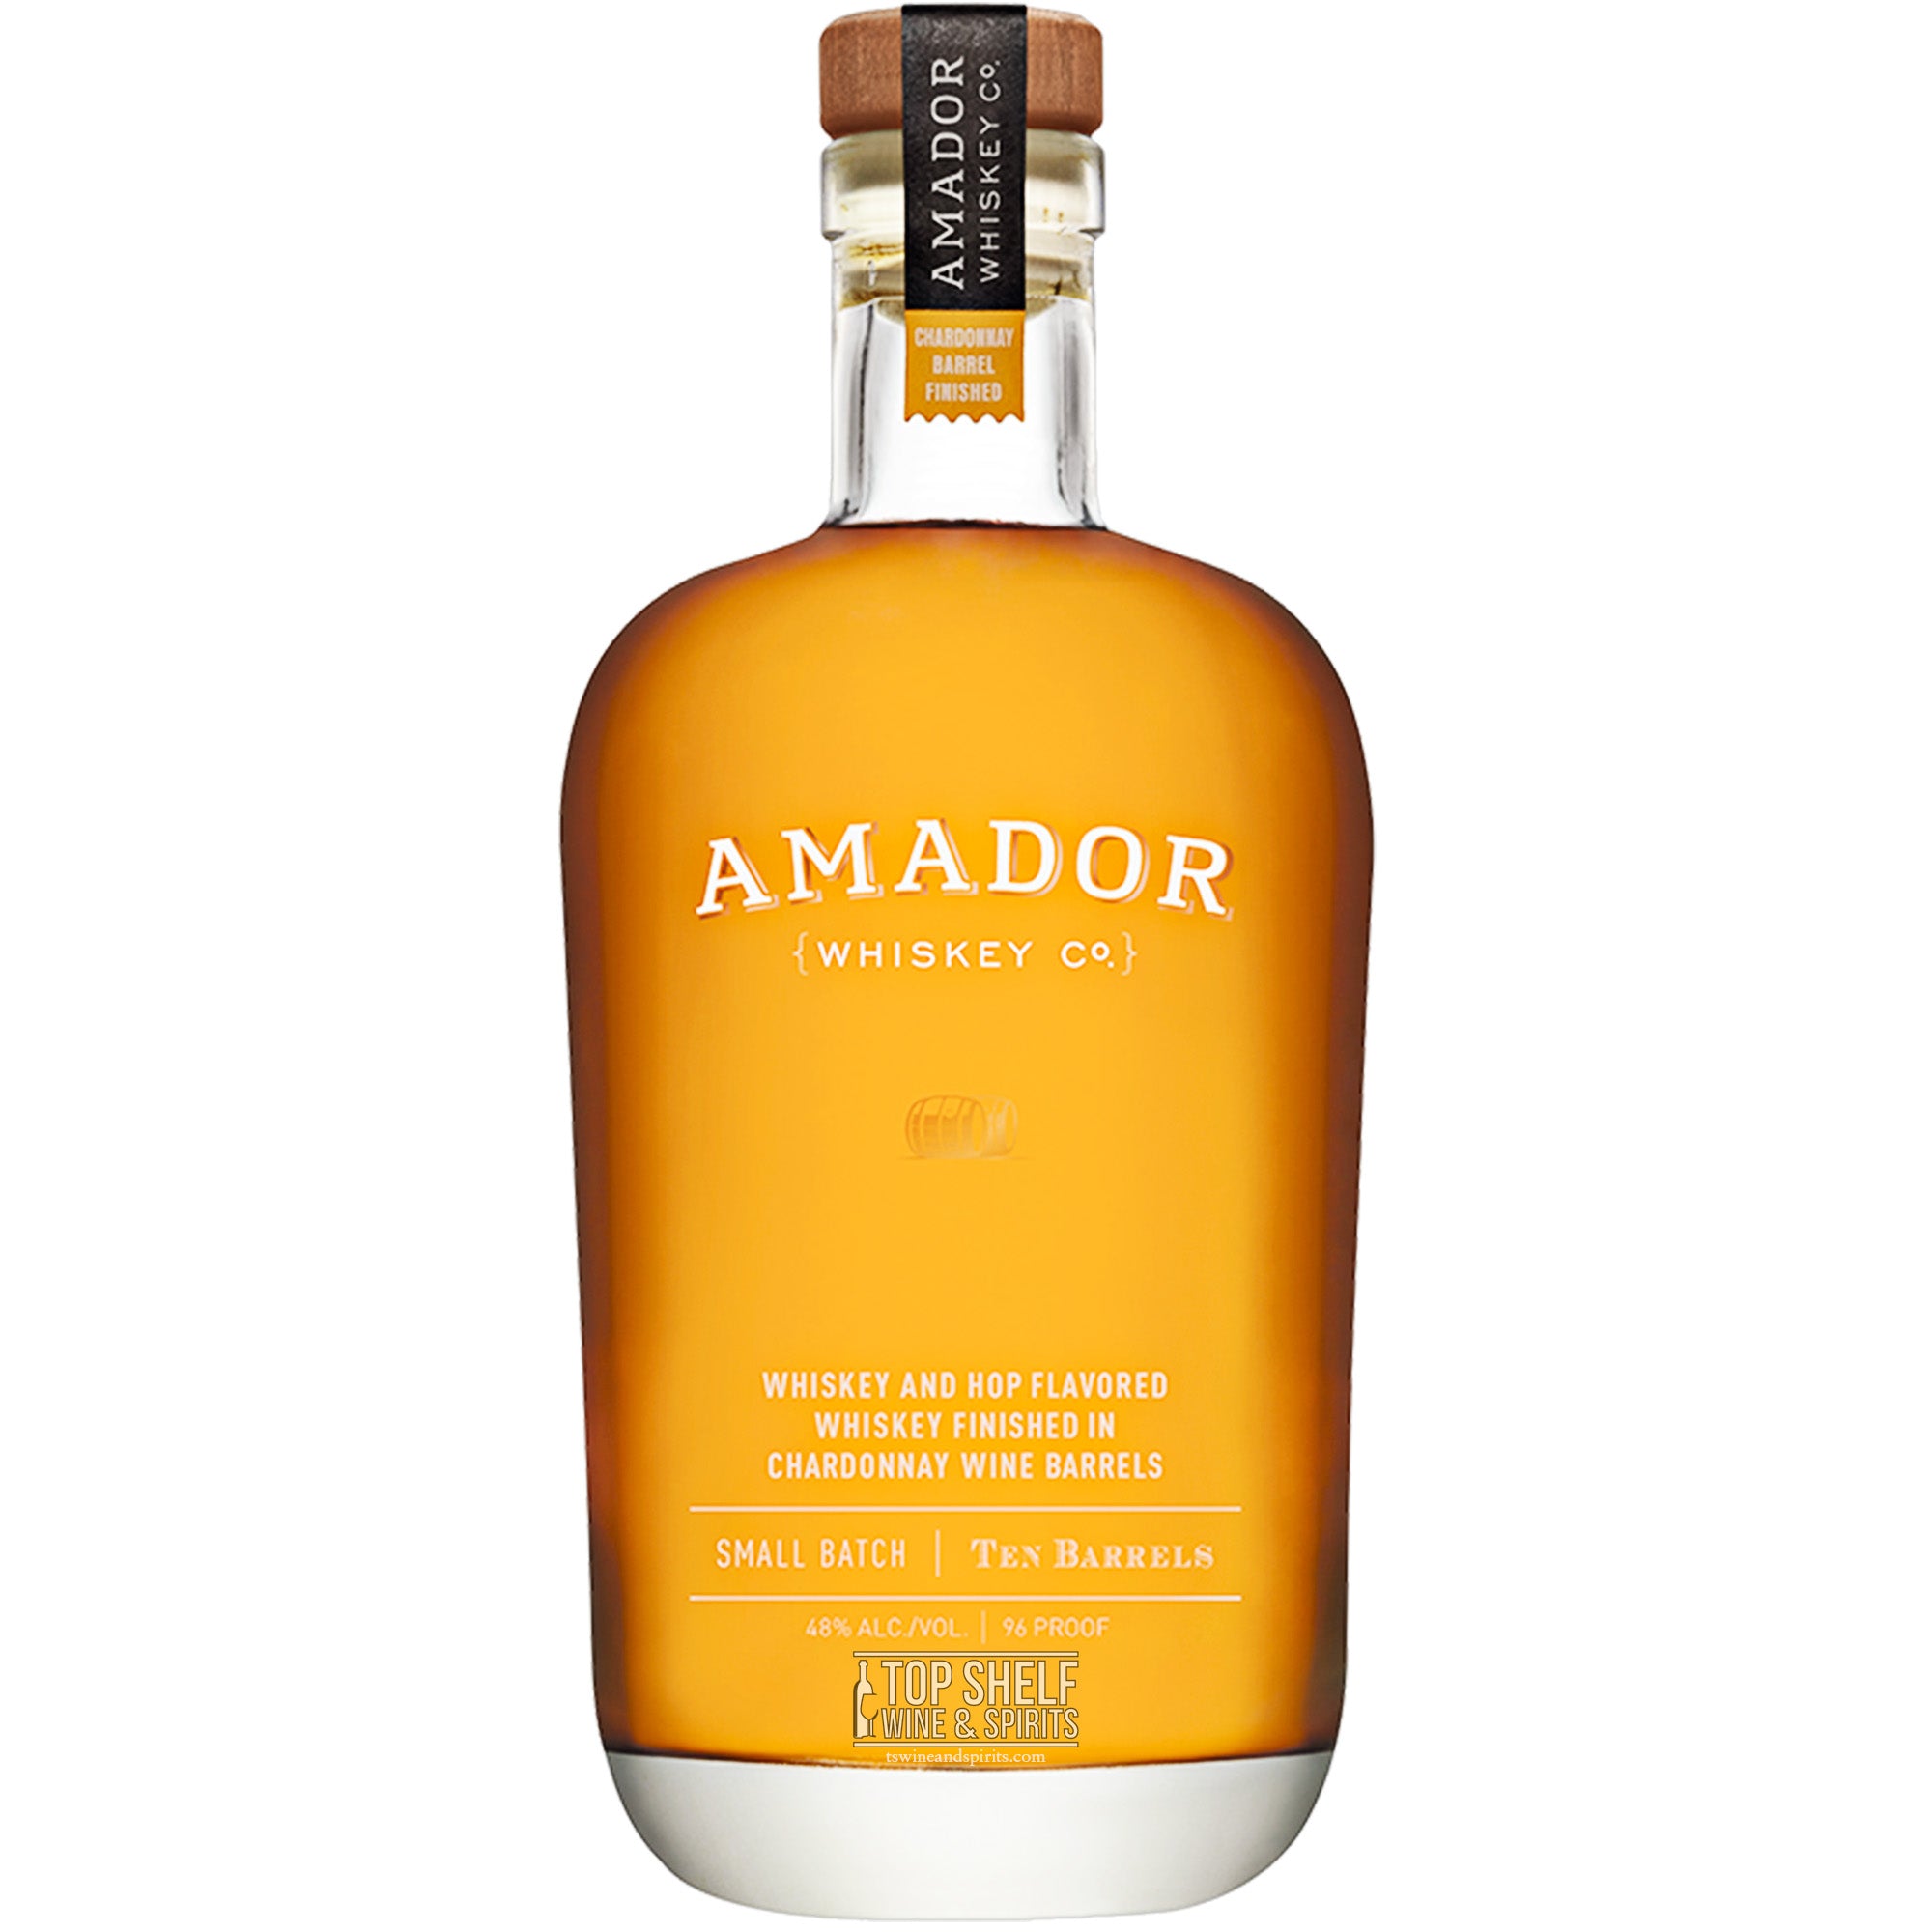 Amador Limited Release Ten Barrels Small Batch Straight Hop-Flavored